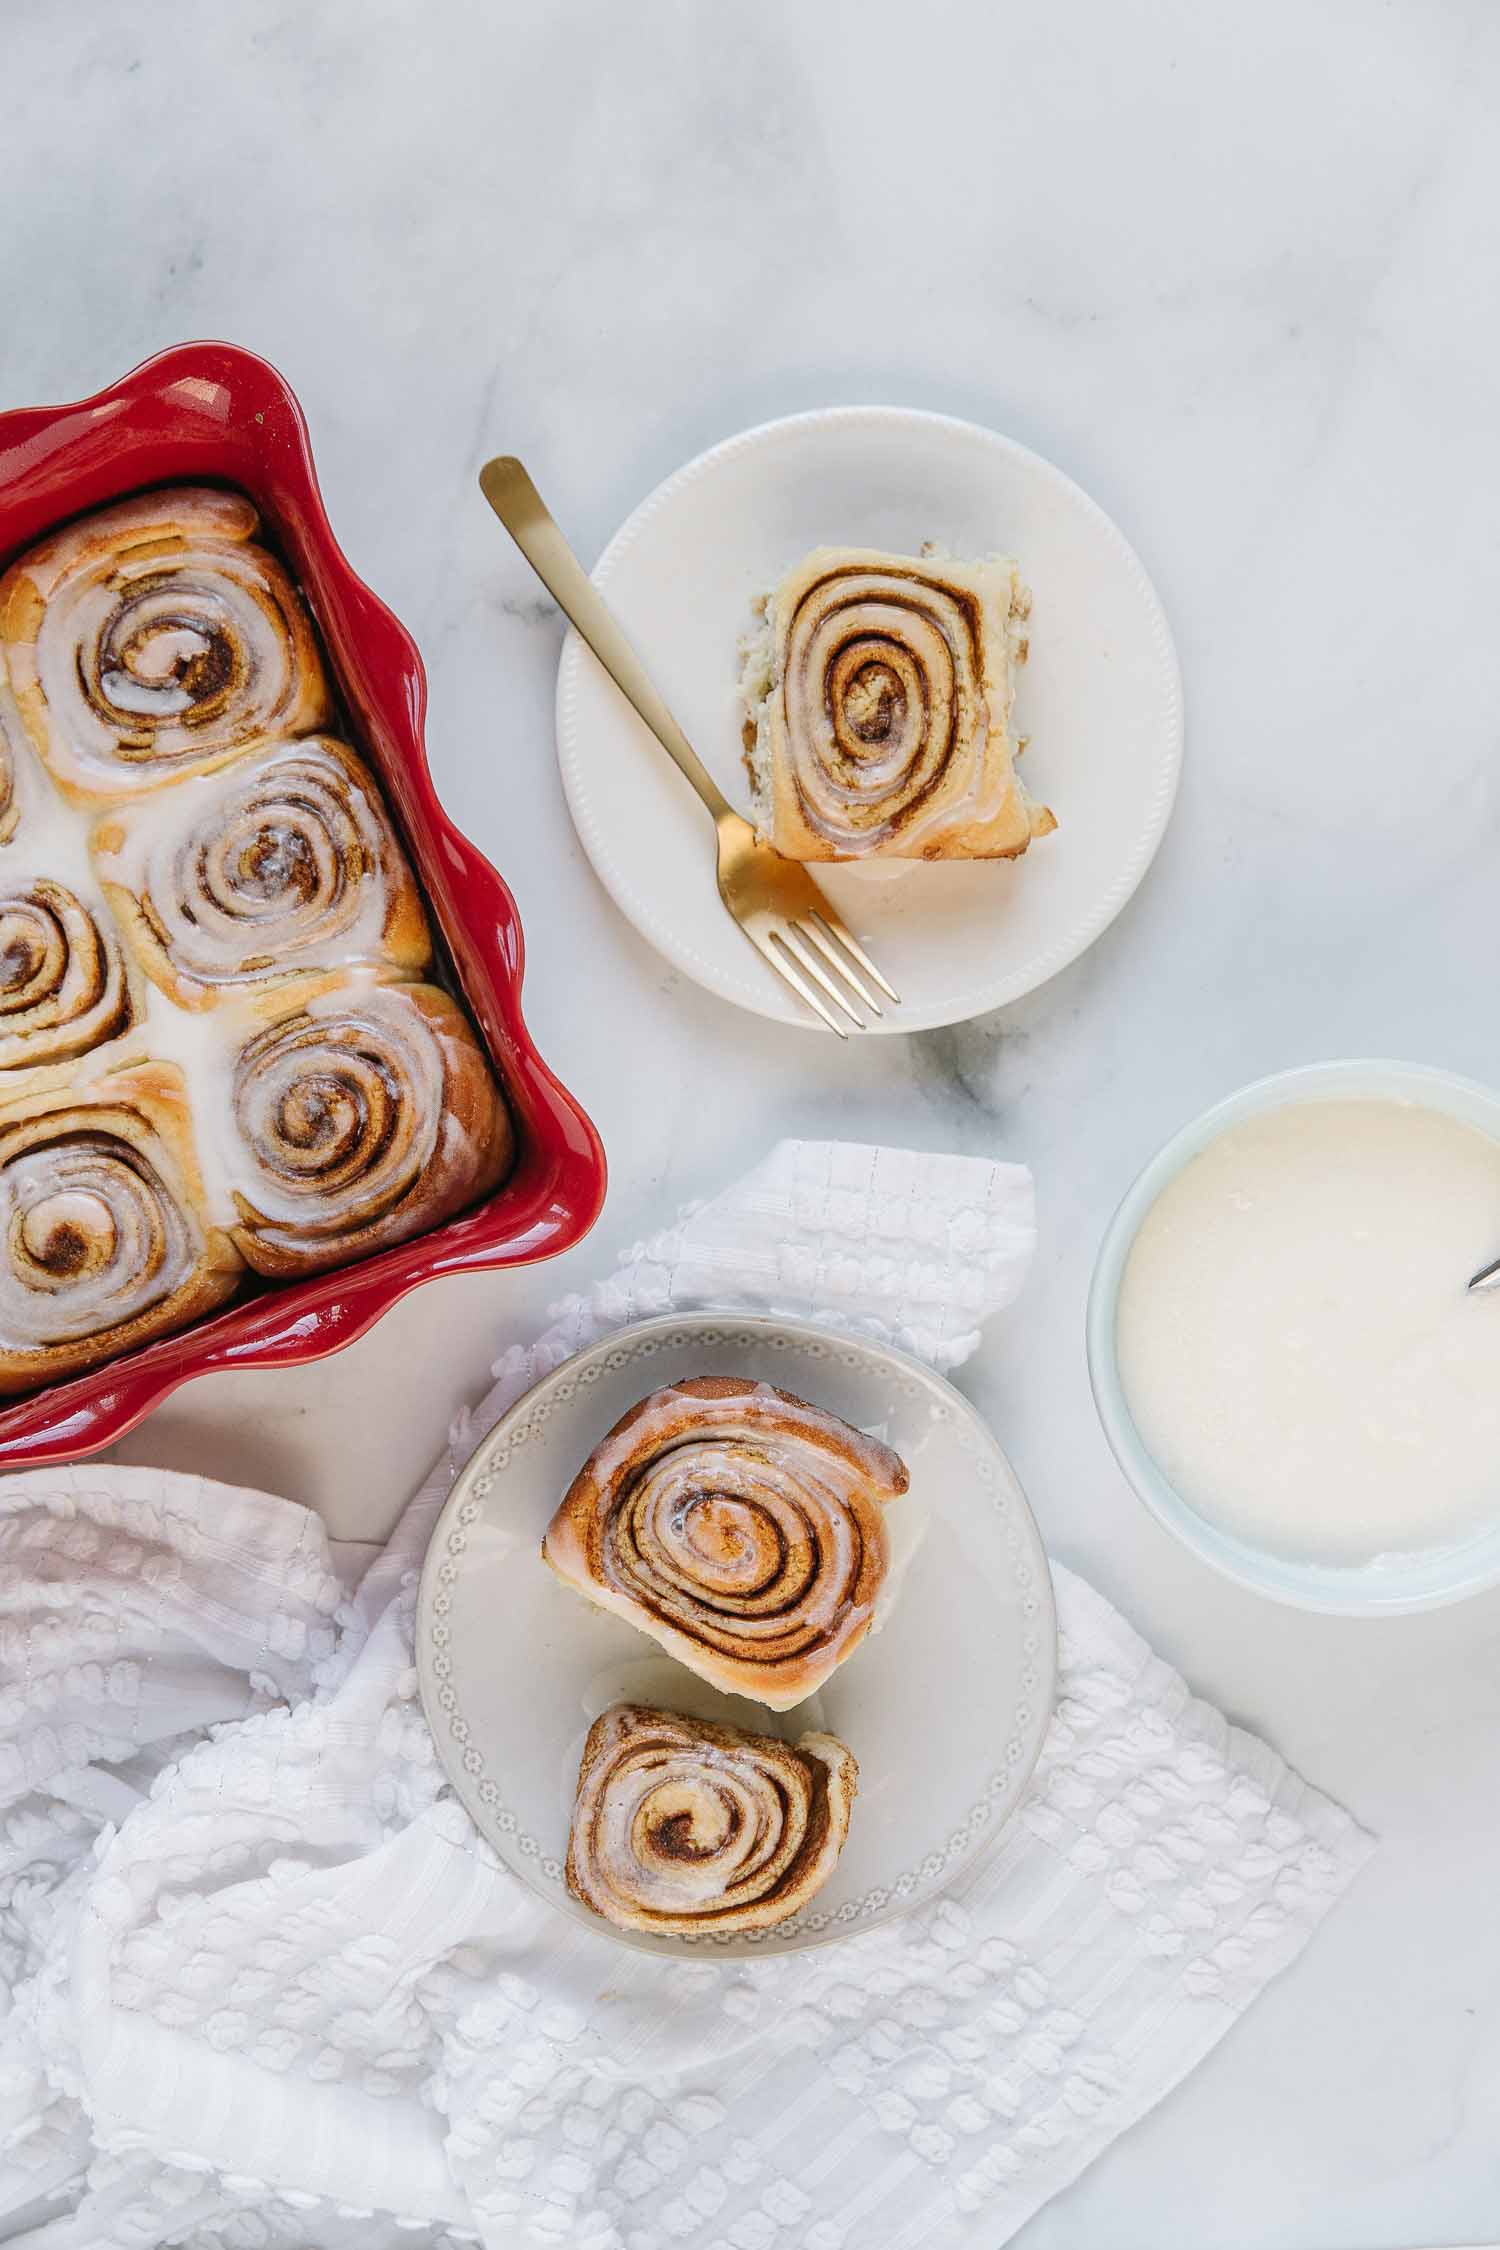 A white plate with two cinnamon rolls with a white bowl of icing, white plate with a cinnamon roll with a gold fork on it and a red pan of other cinnamon rolls.